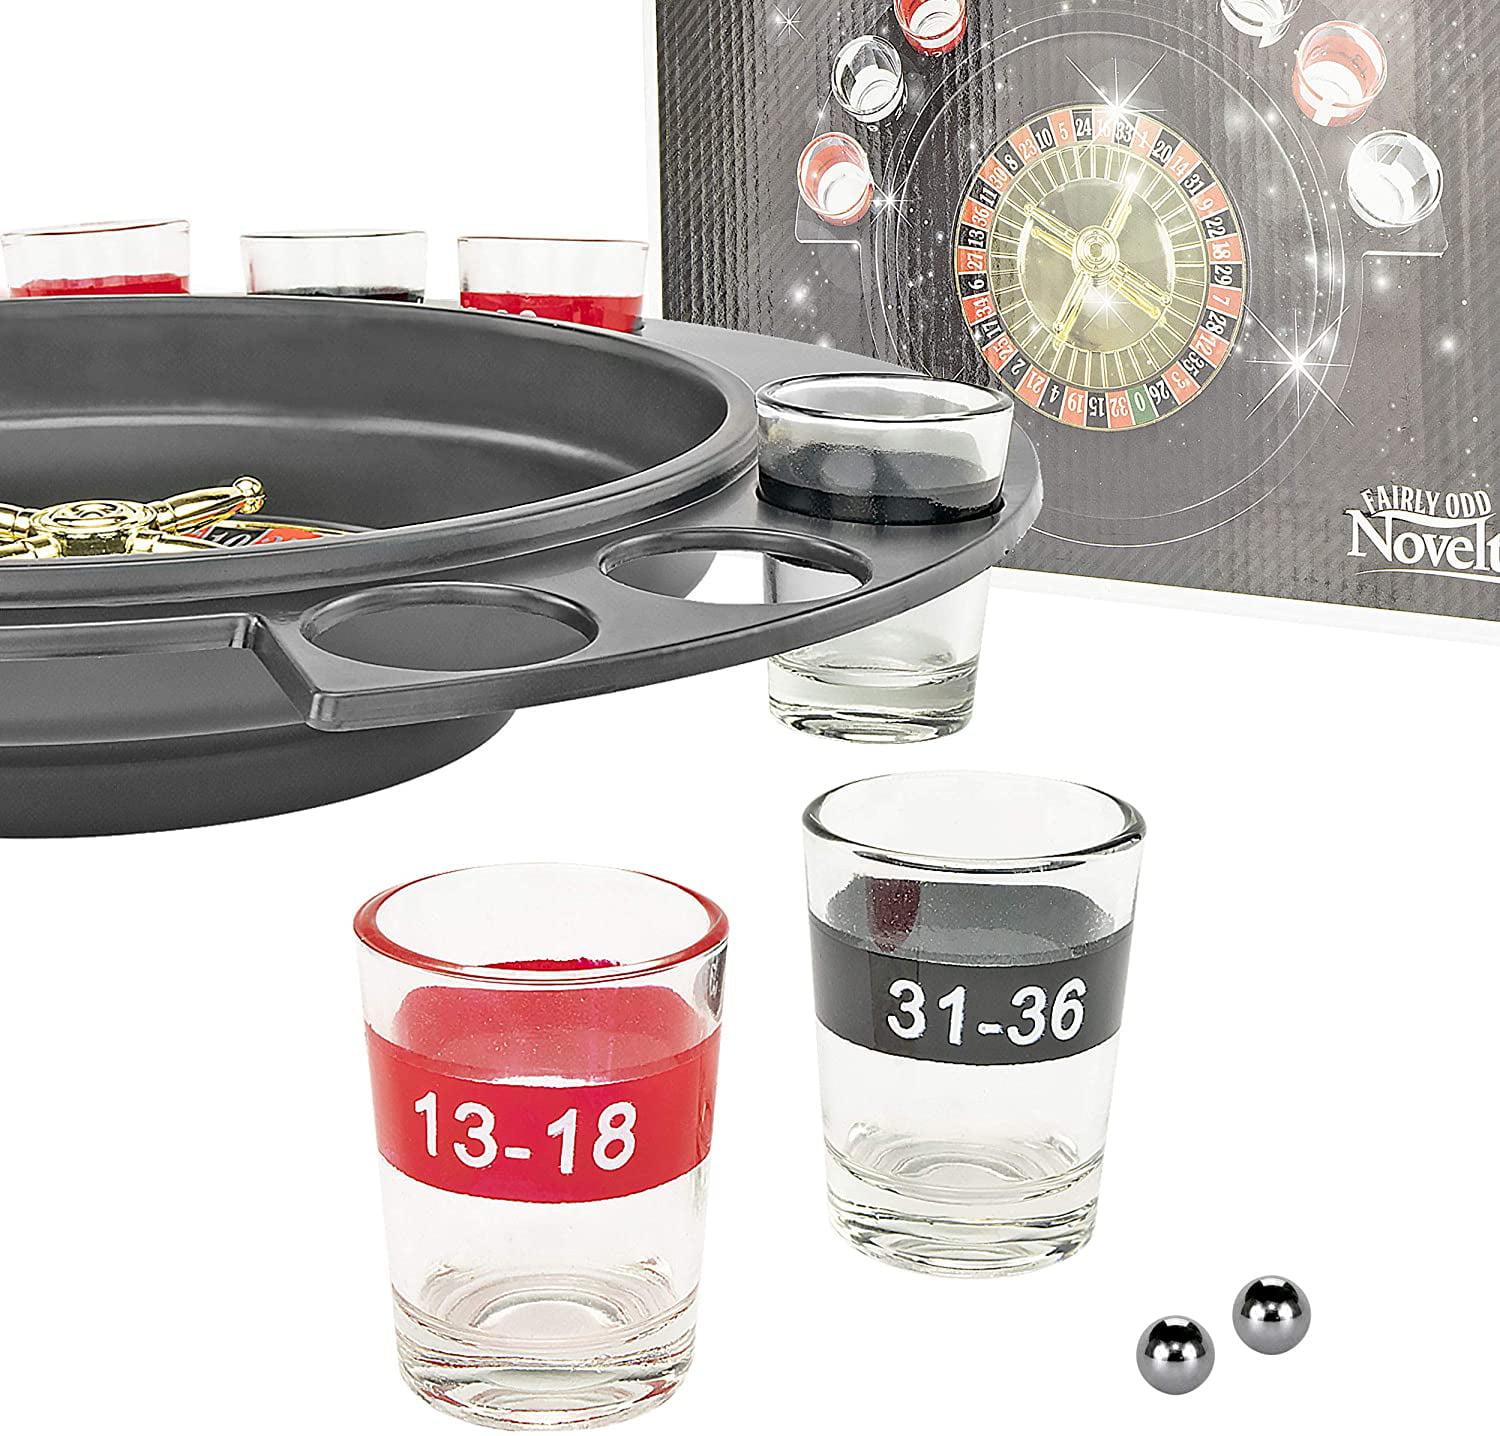 Fun Novelty Drinks Accessory for all Parties Invero Fishing Set Homes and more Adults Drinking Game Includes 4 Shot Glasses Mini Boat and all Accessories Festive Times 